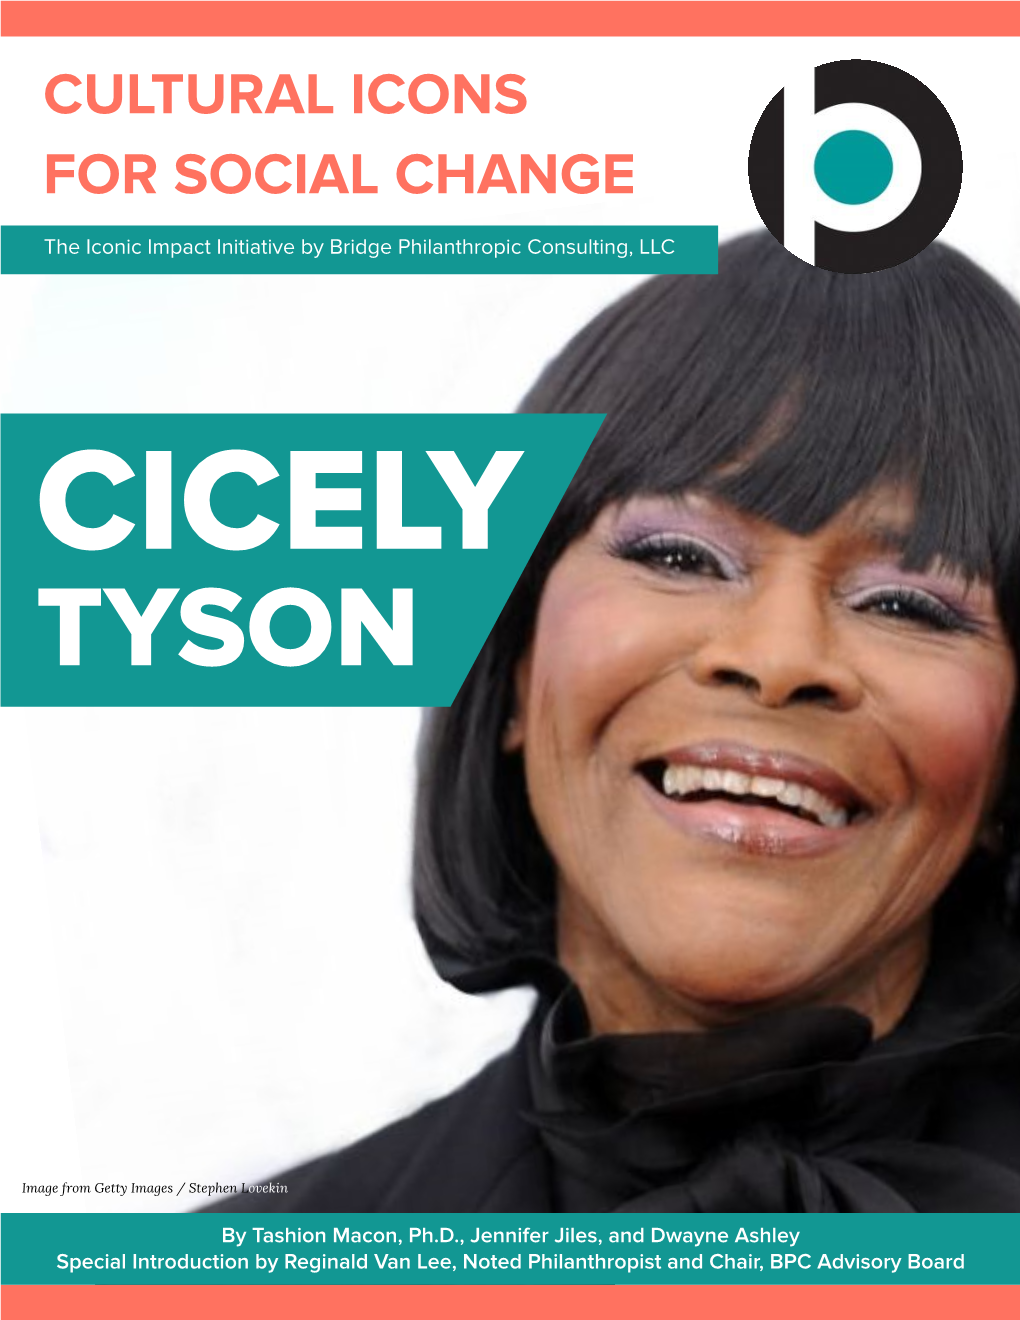 Cultural Icons for Social Change